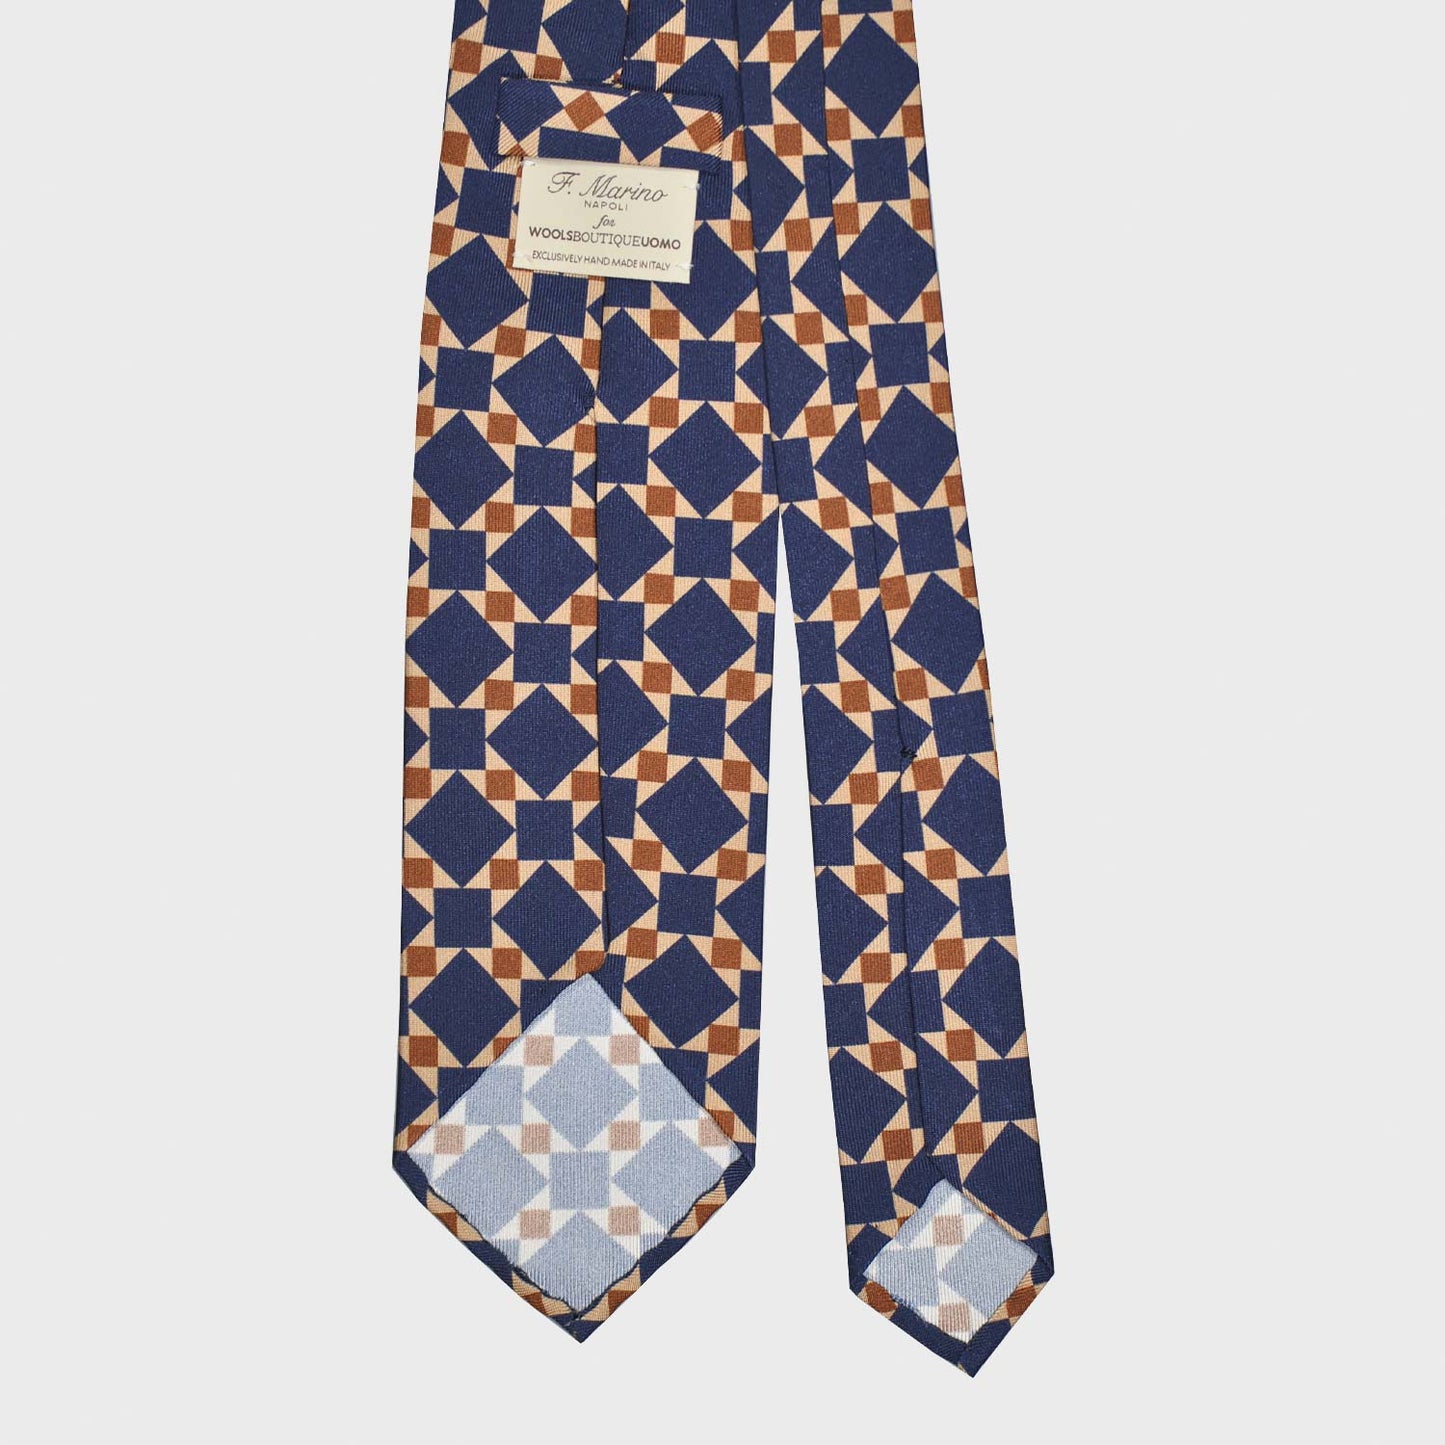 Exclusive silk tie made with finest Italian silk soft to the touch, sand beige background with cobalt blue and rust brown mosaic pattern, unlined tie 3 folds, F.Marino Napoli ties exclusive for Wools Boutique Uomo